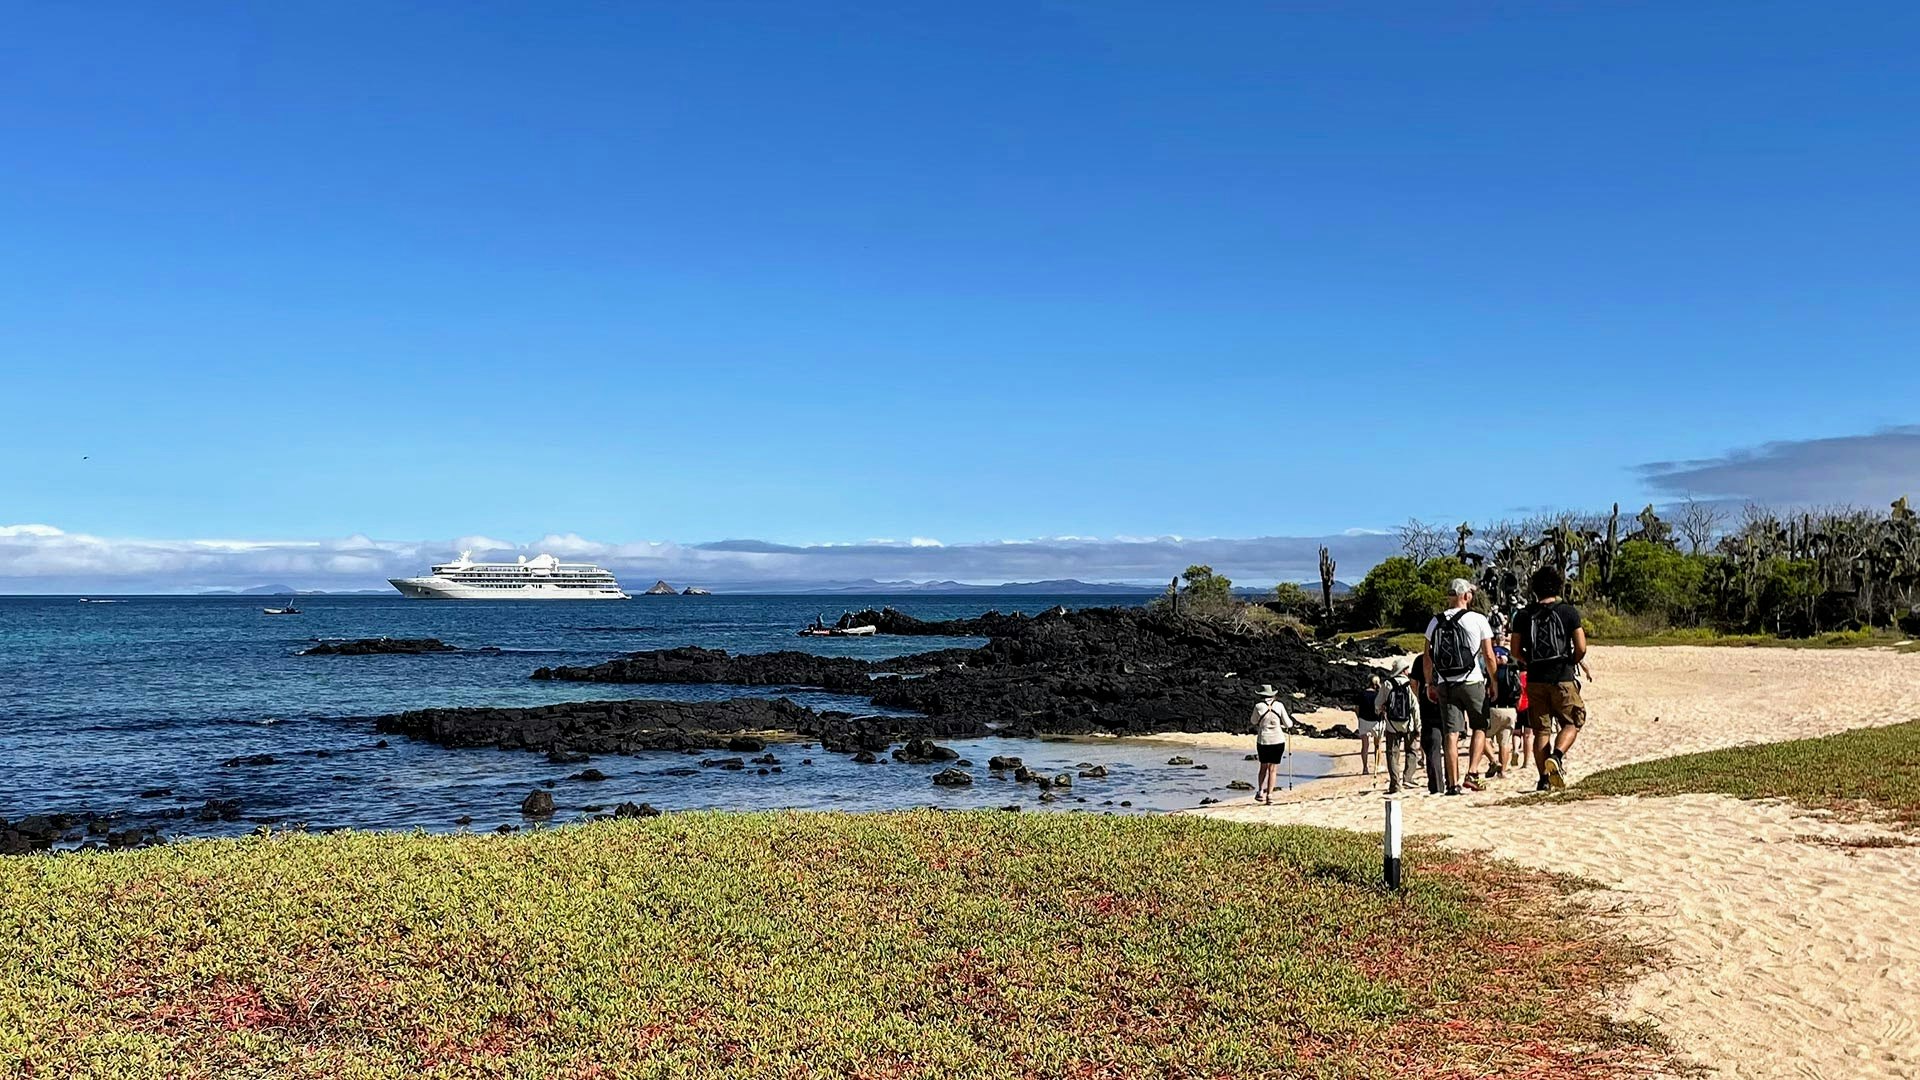 Sketchin - Case - Silversea Silver Origin Galapagos Islands - panoramic view, people walking on the beach, Silver Origin cruise ship in the background